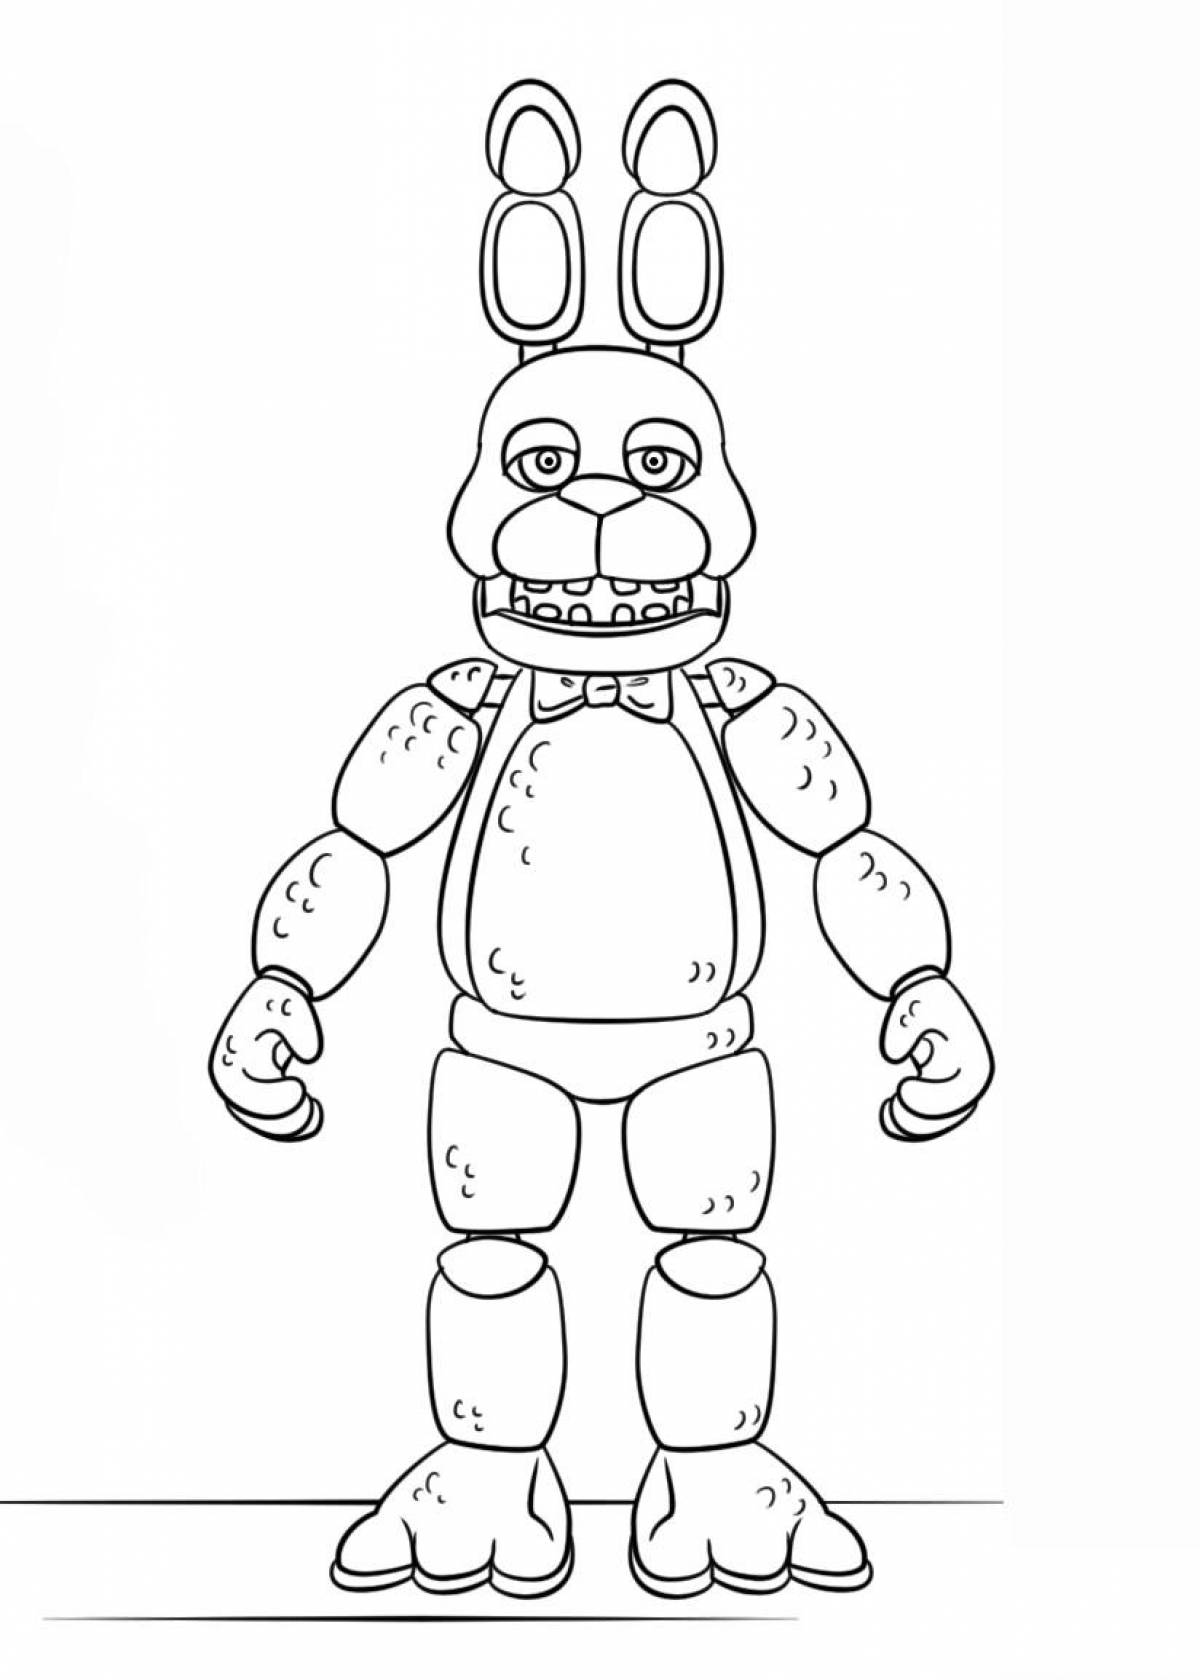 Colorful teen animatronics coloring page